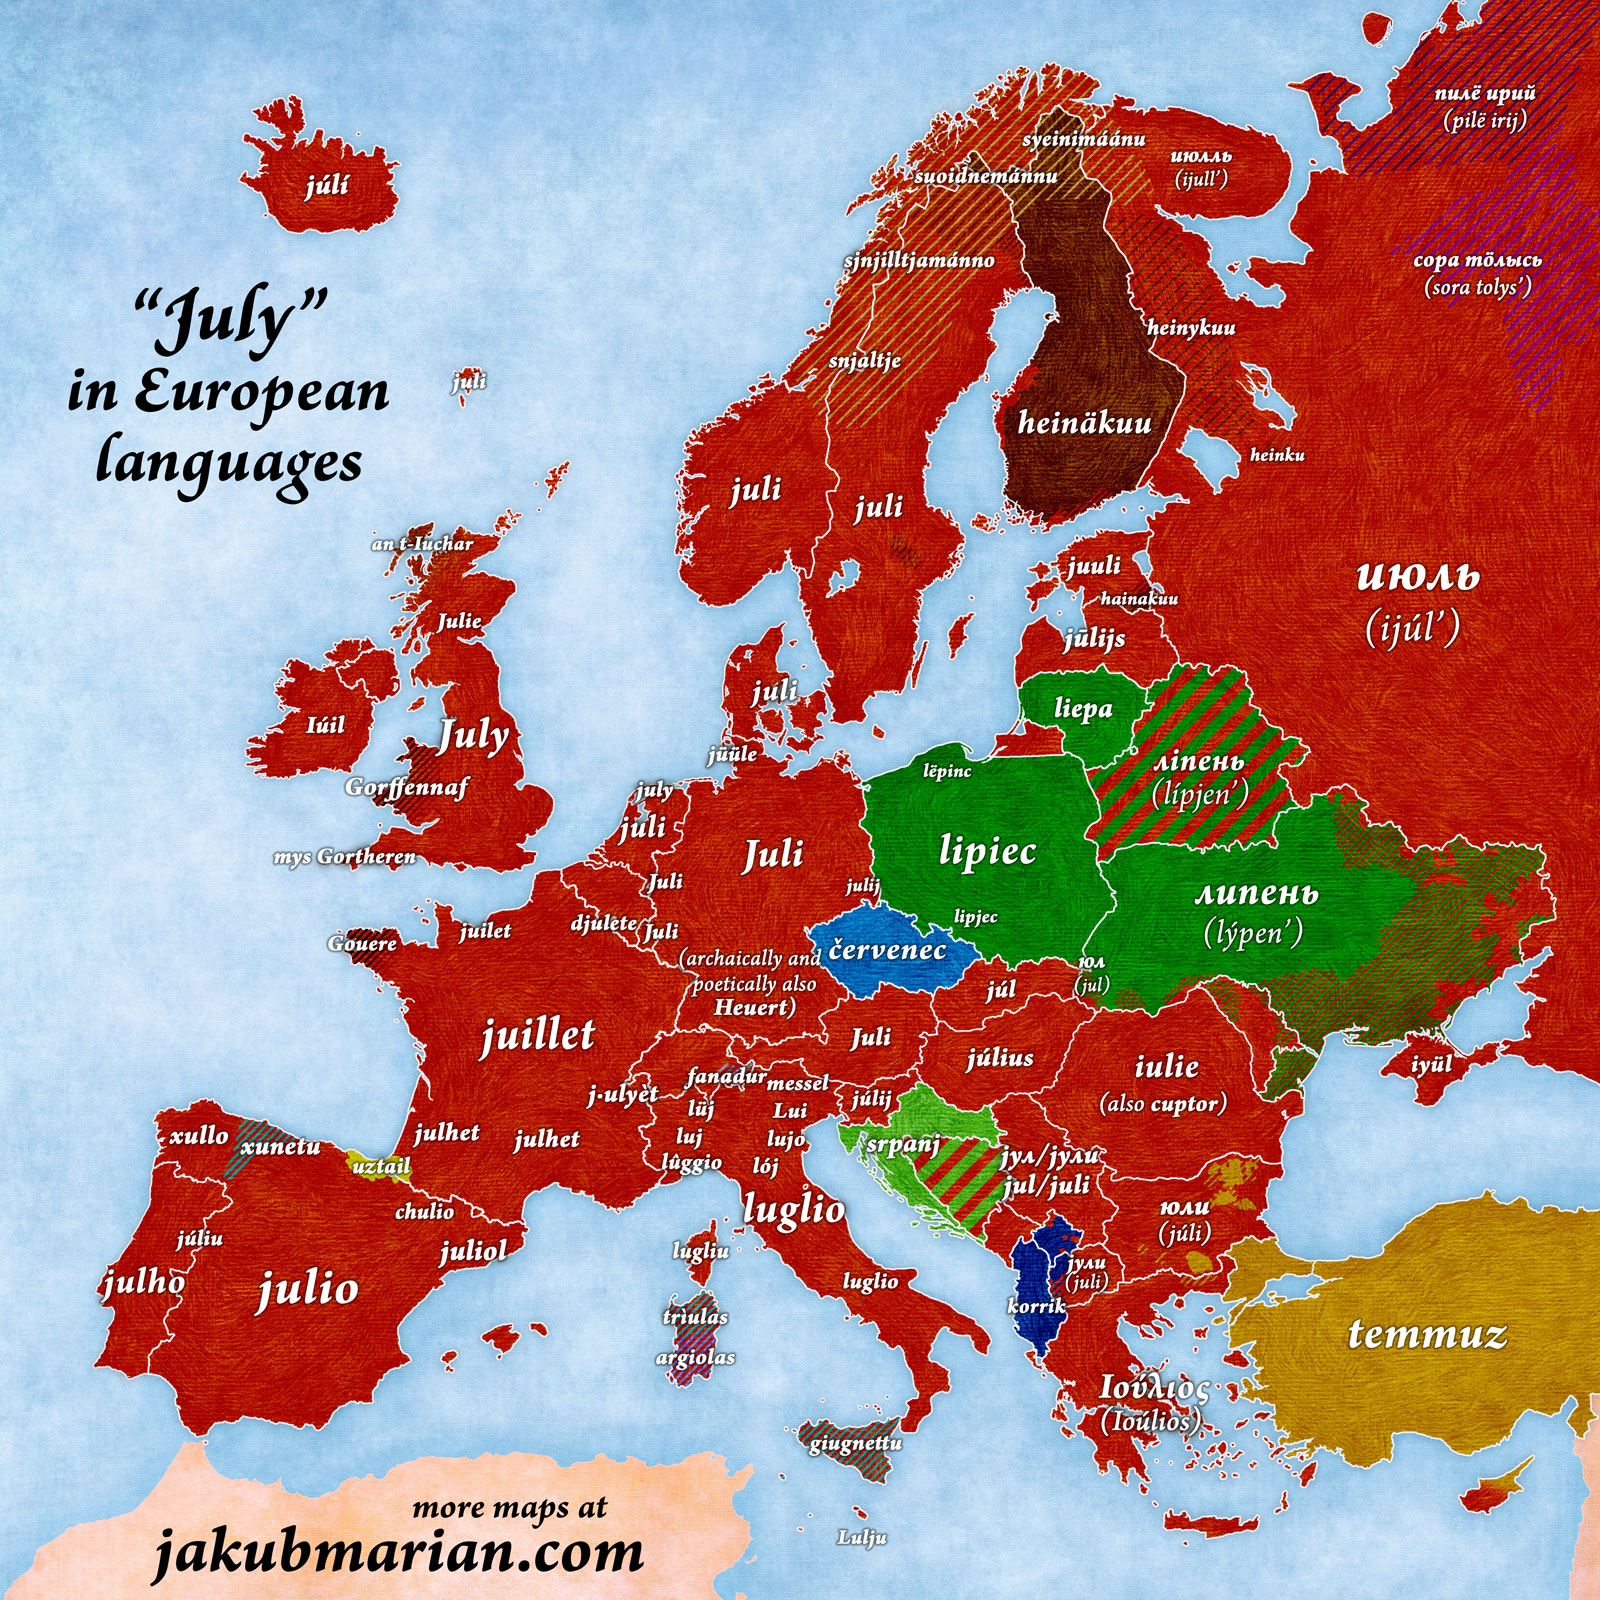 July in European languages